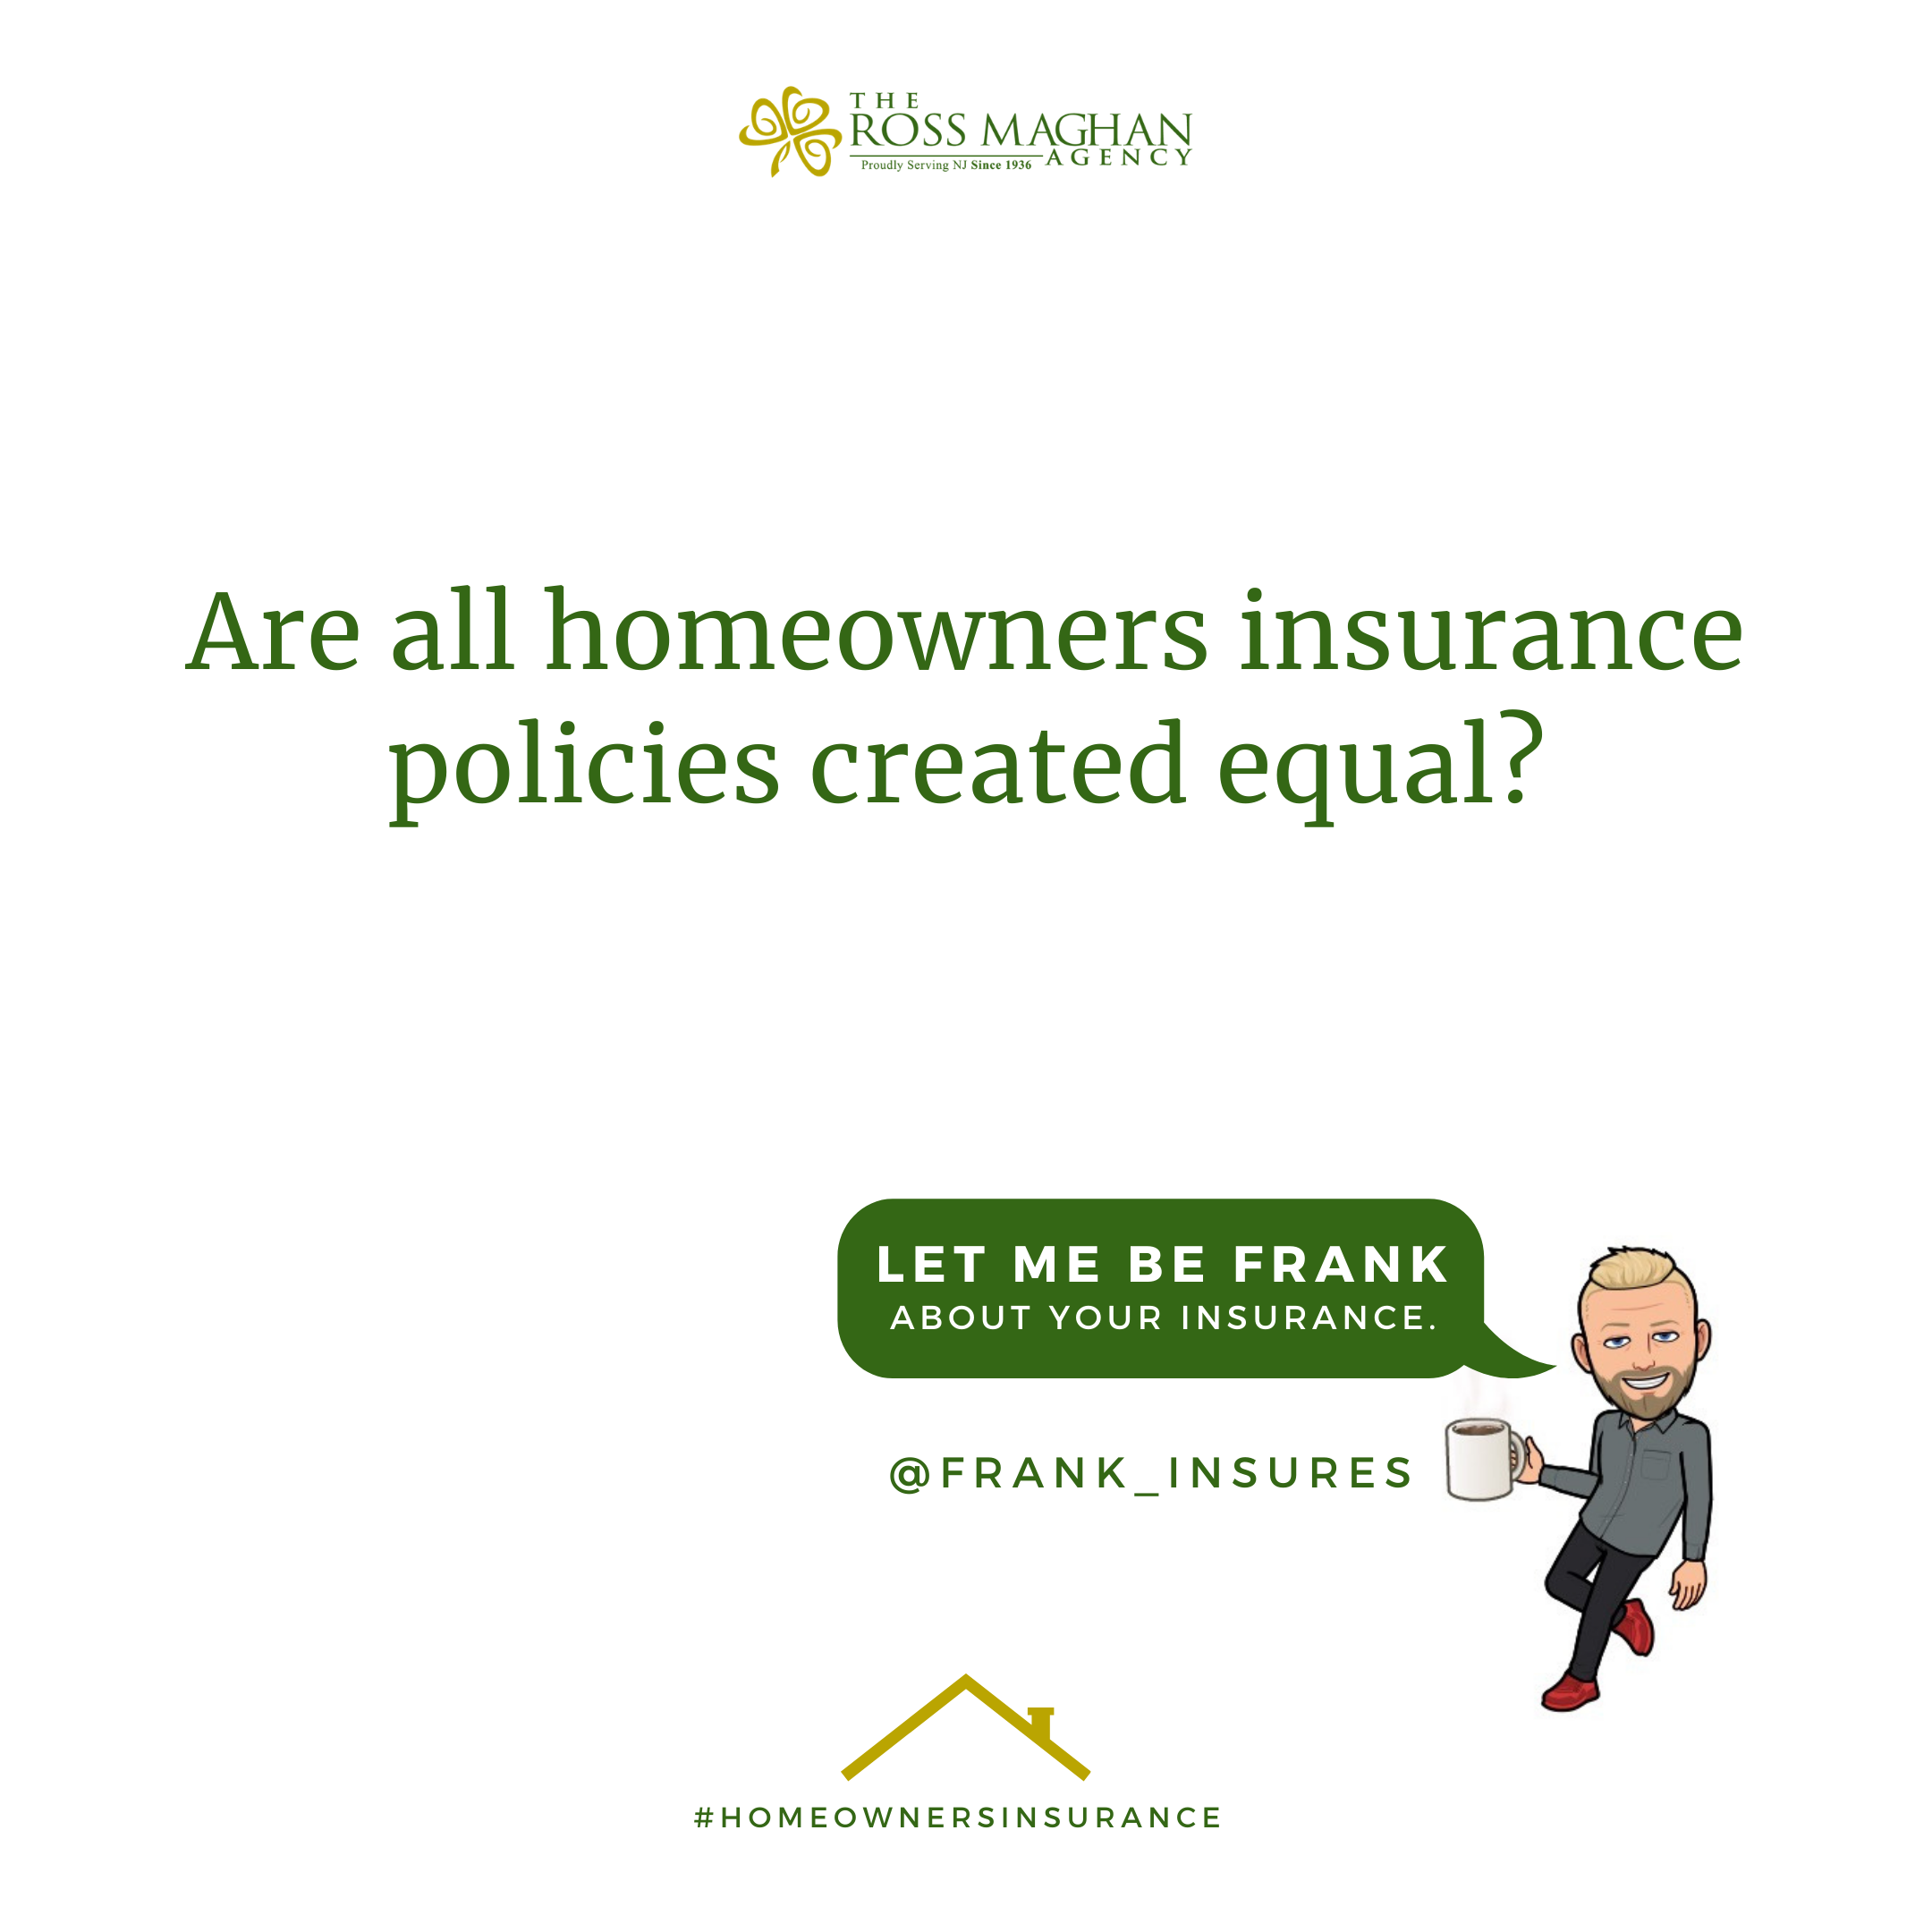 Featured image for “Are all homeowners insurance policies created equal?”